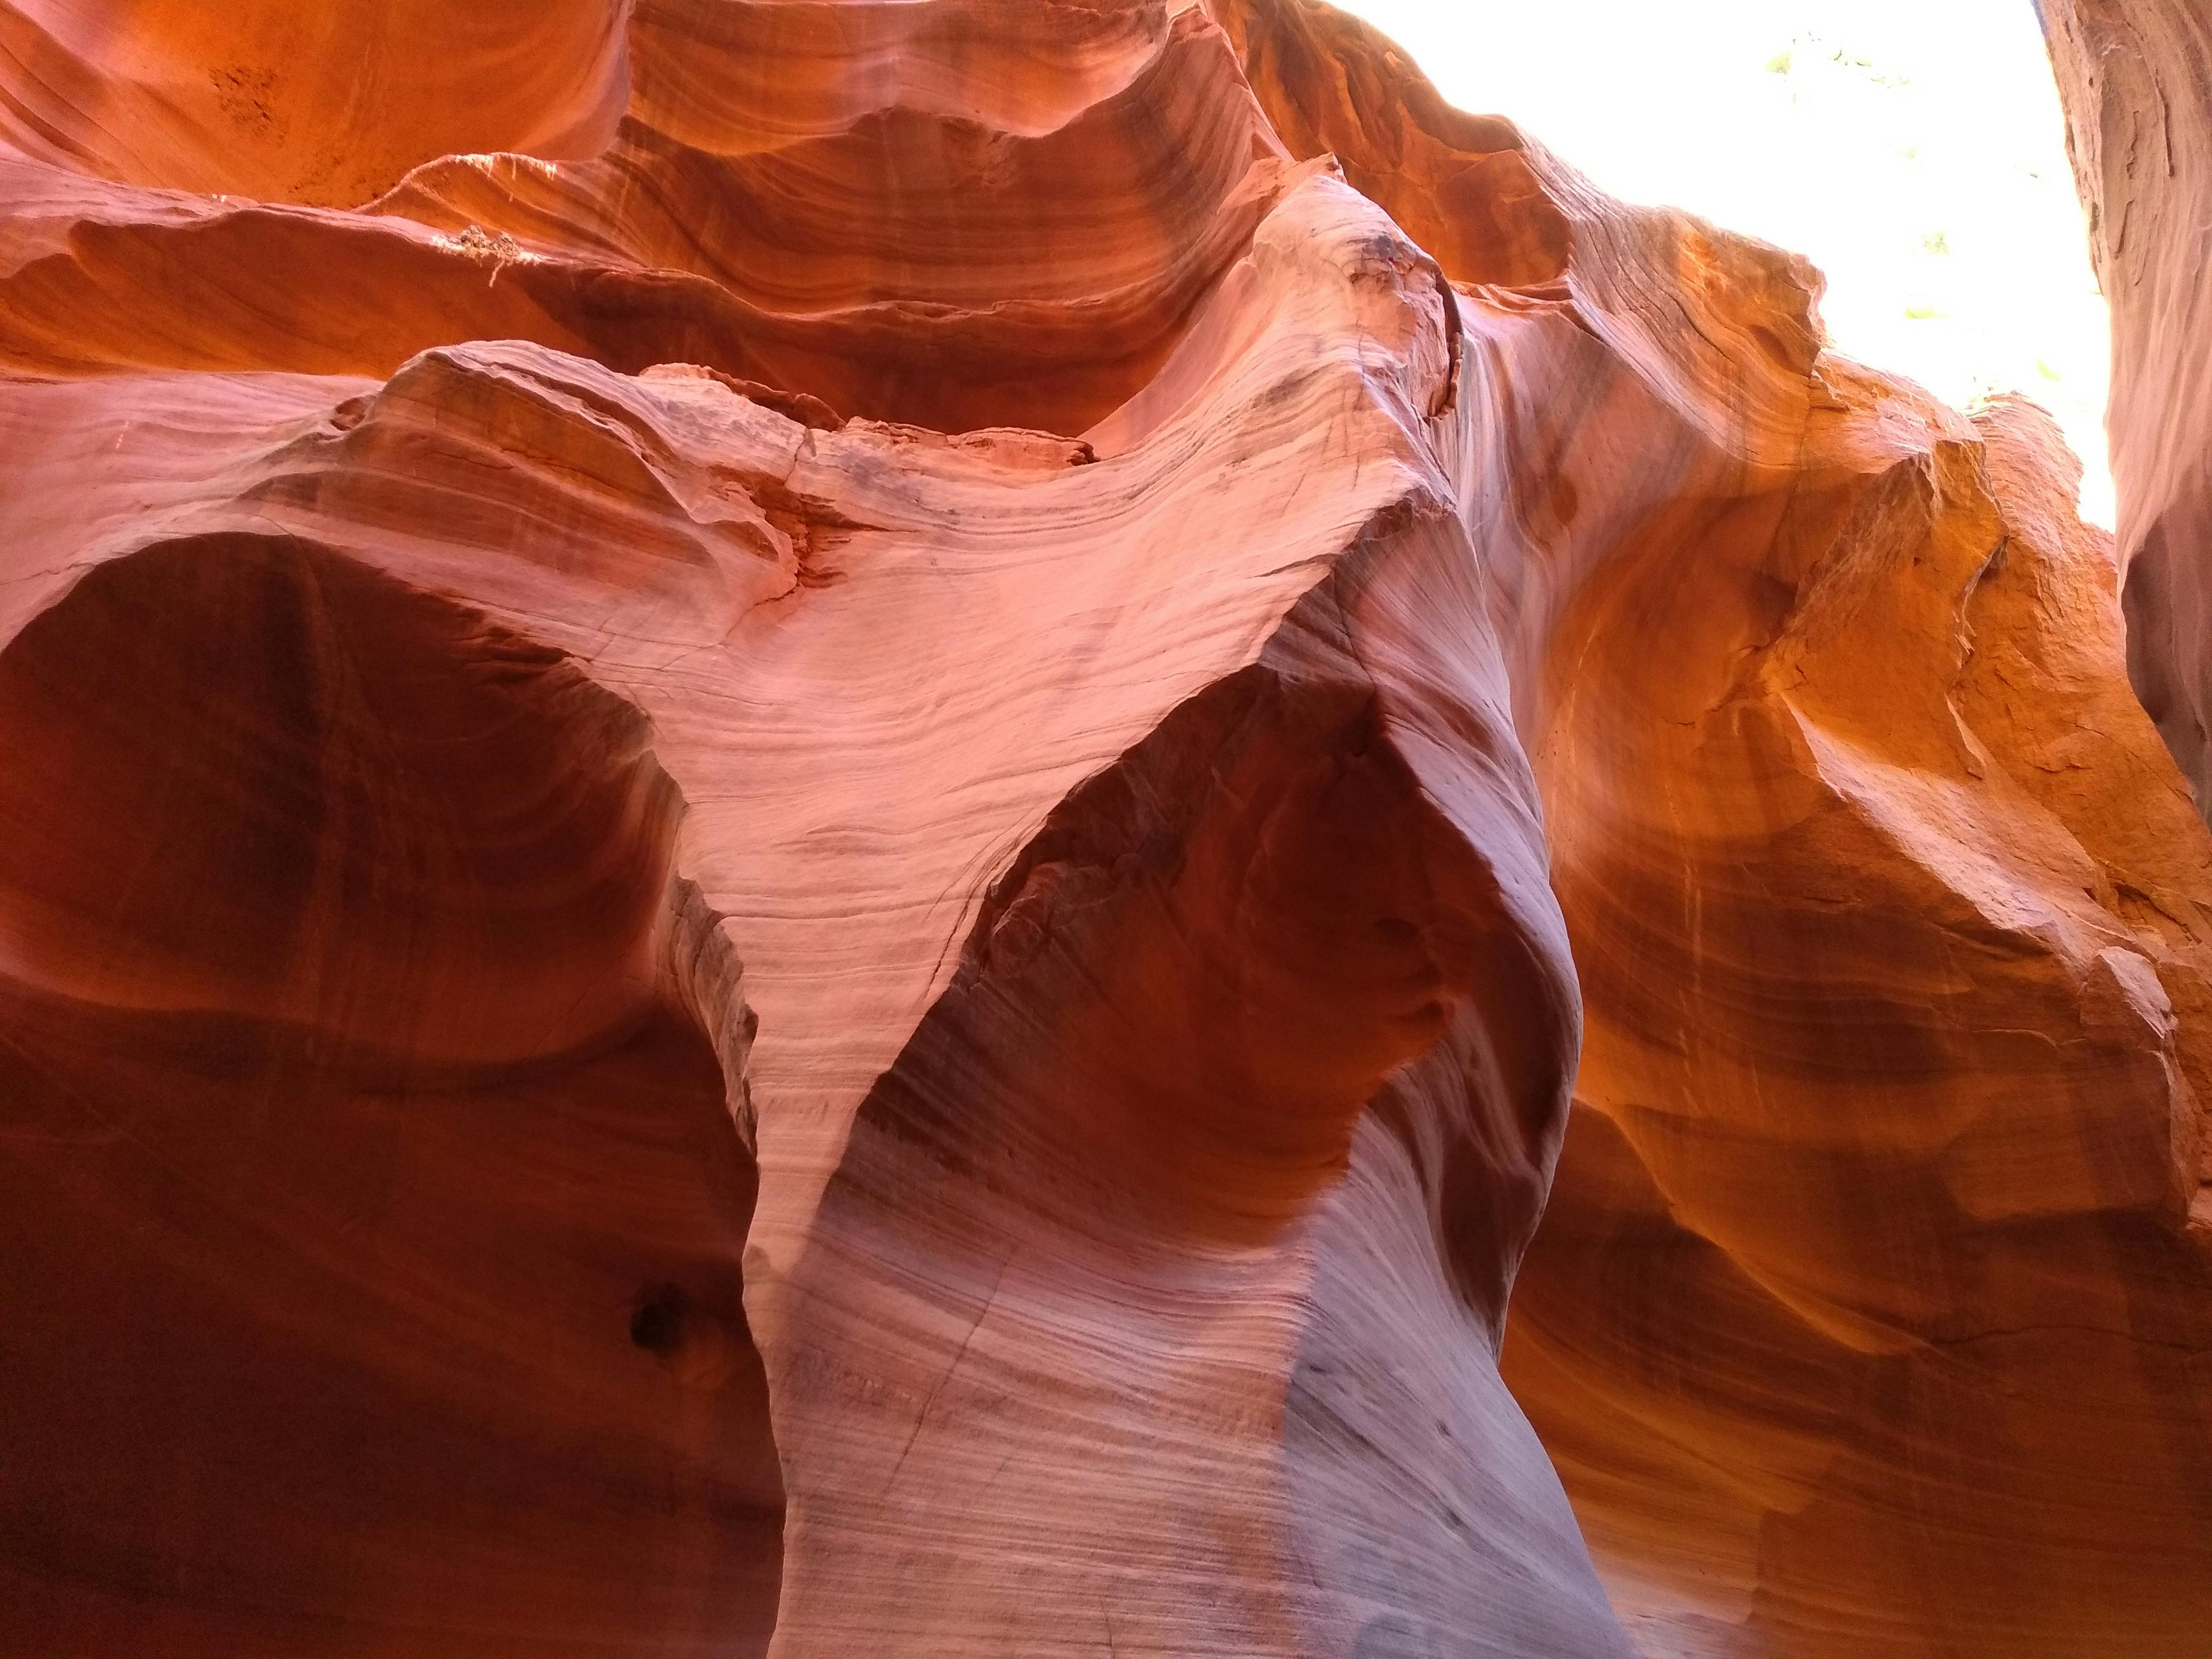 Lower Antelope Canyon and Horseshoe Bend Tour from Las Vegas